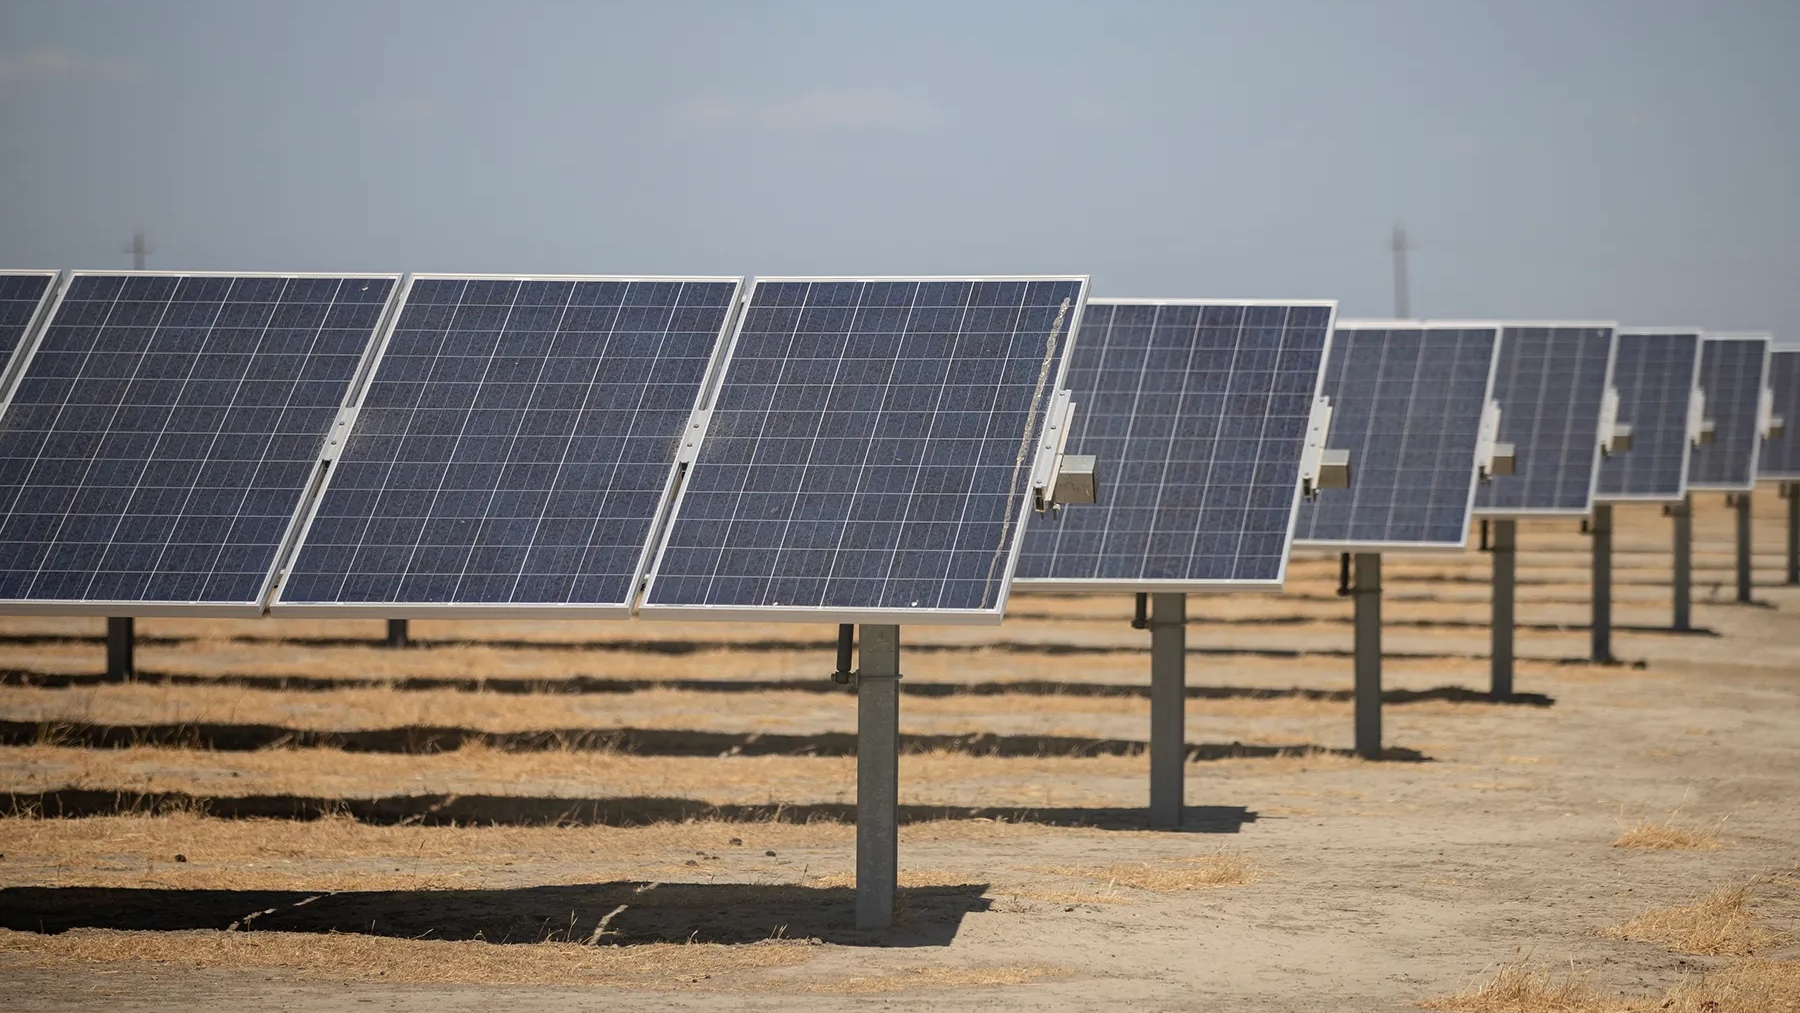 Several rows of black solar panels stretch over a yellow field.